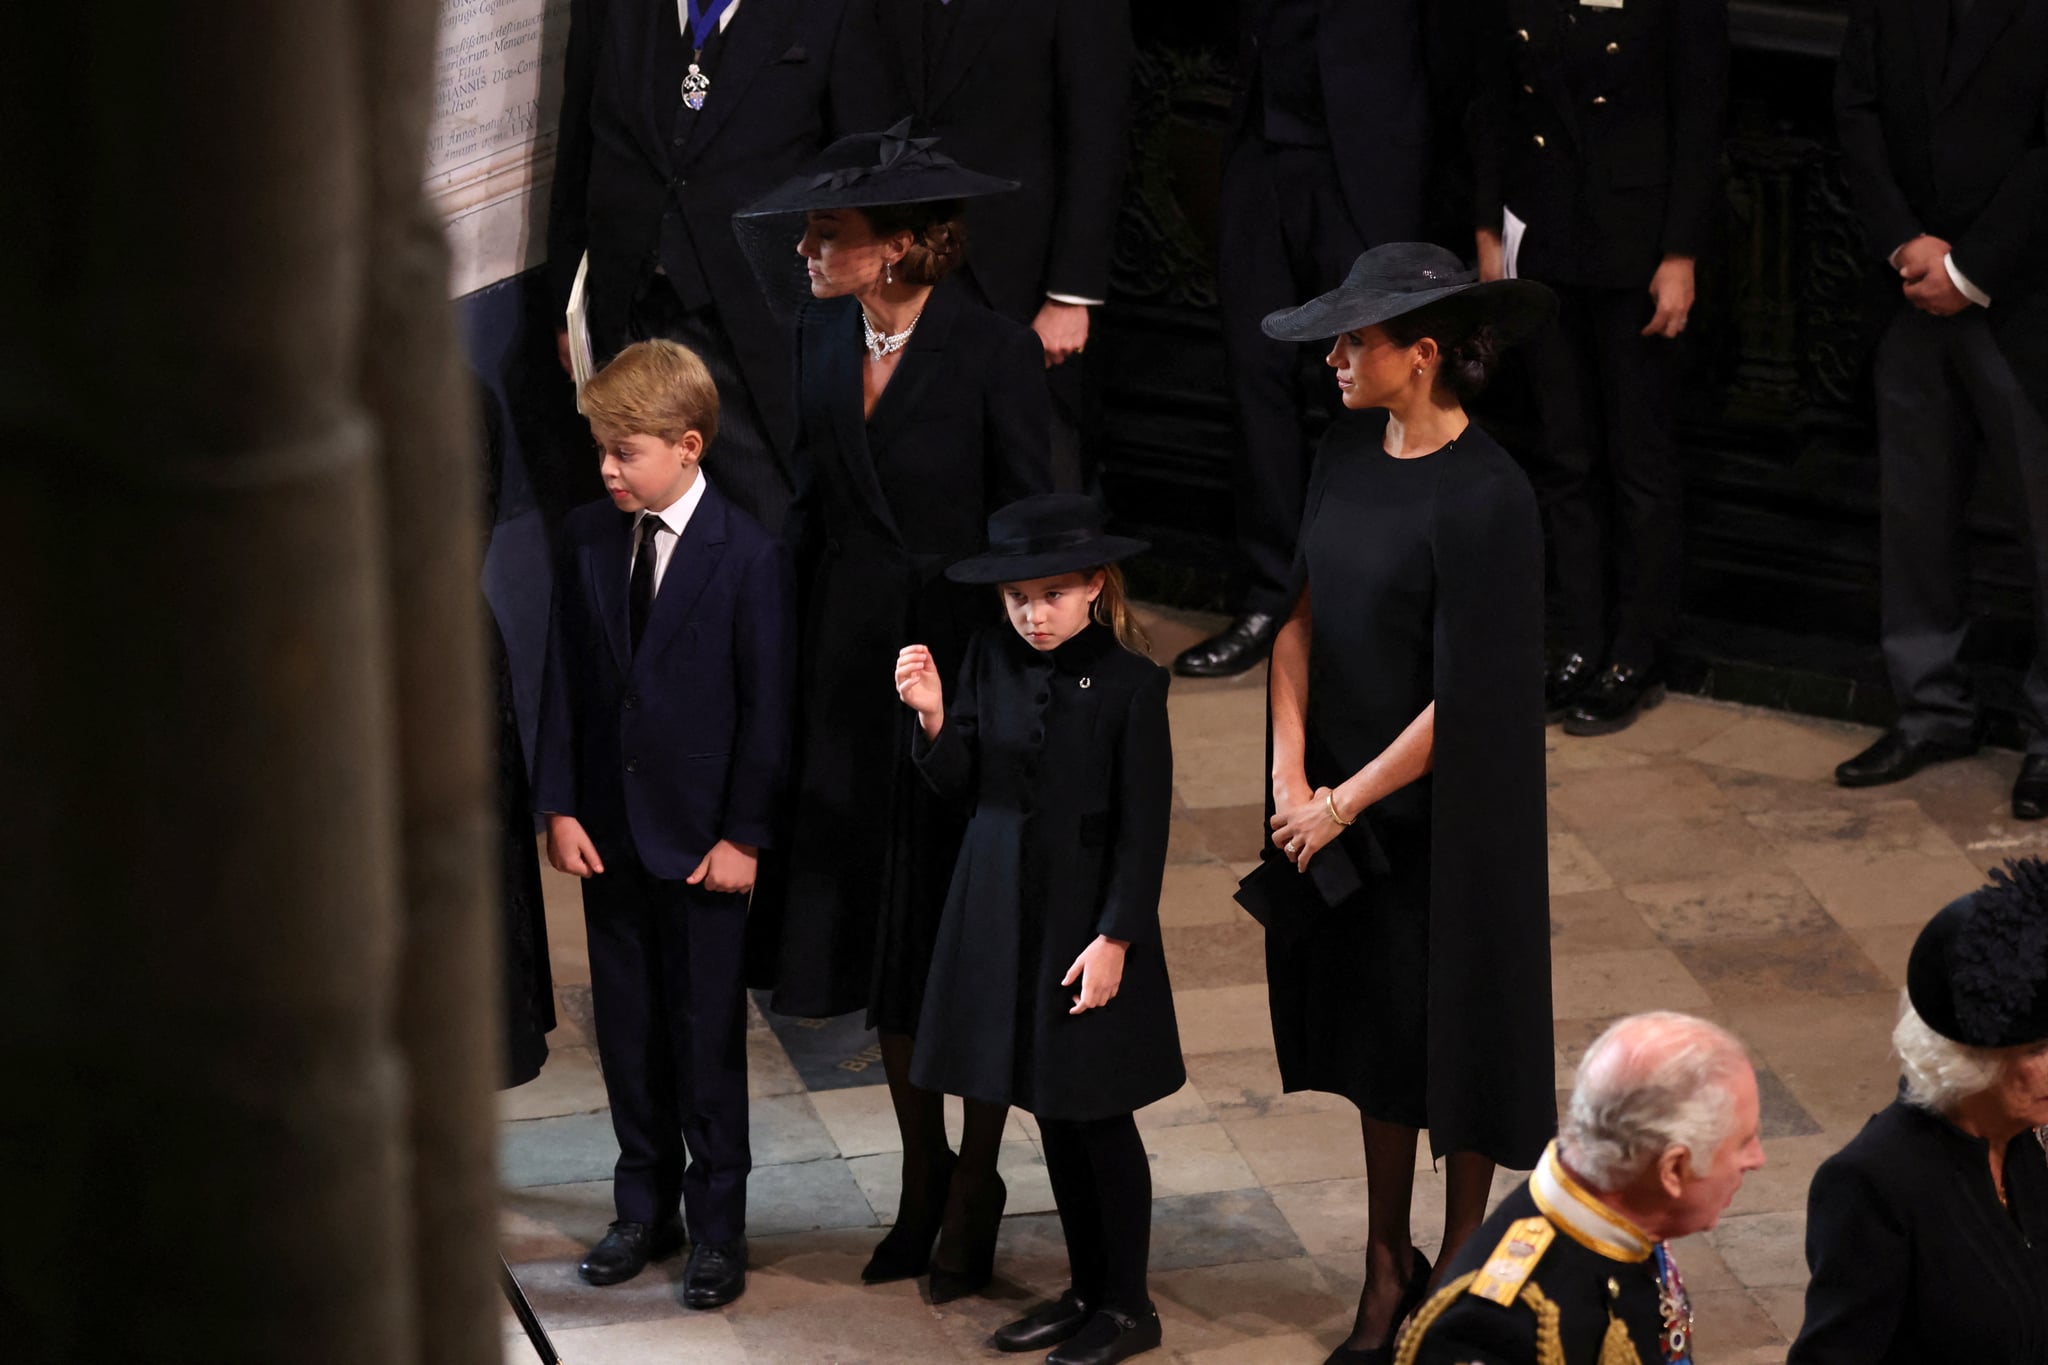 LONDON, ENGLAND - SEPTEMBER 19: King Charles III and Camilla, Queen Consort, Catherine, Princess of Wales, Meghan, Duchess of Sussex, Prince George and Princess Charlotte arrive at the State Funeral of Queen Elizabeth II, held at Westminster Abbey on September 19, 2022 in London, England.  Elizabeth Alexandra Mary Windsor was born in Bruton Street, Mayfair, London on 21 April 1926. She married Prince Philip in 1947 and ascended the throne of the United Kingdom and Commonwealth on 6 February 1952 after the death of her Father, King George VI. Queen Elizabeth II died at Balmoral Castle in Scotland on September 8, 2022, and is succeeded by her eldest son, King Charles III. (Photo by Phil Noble - WPA Pool/Getty Images)